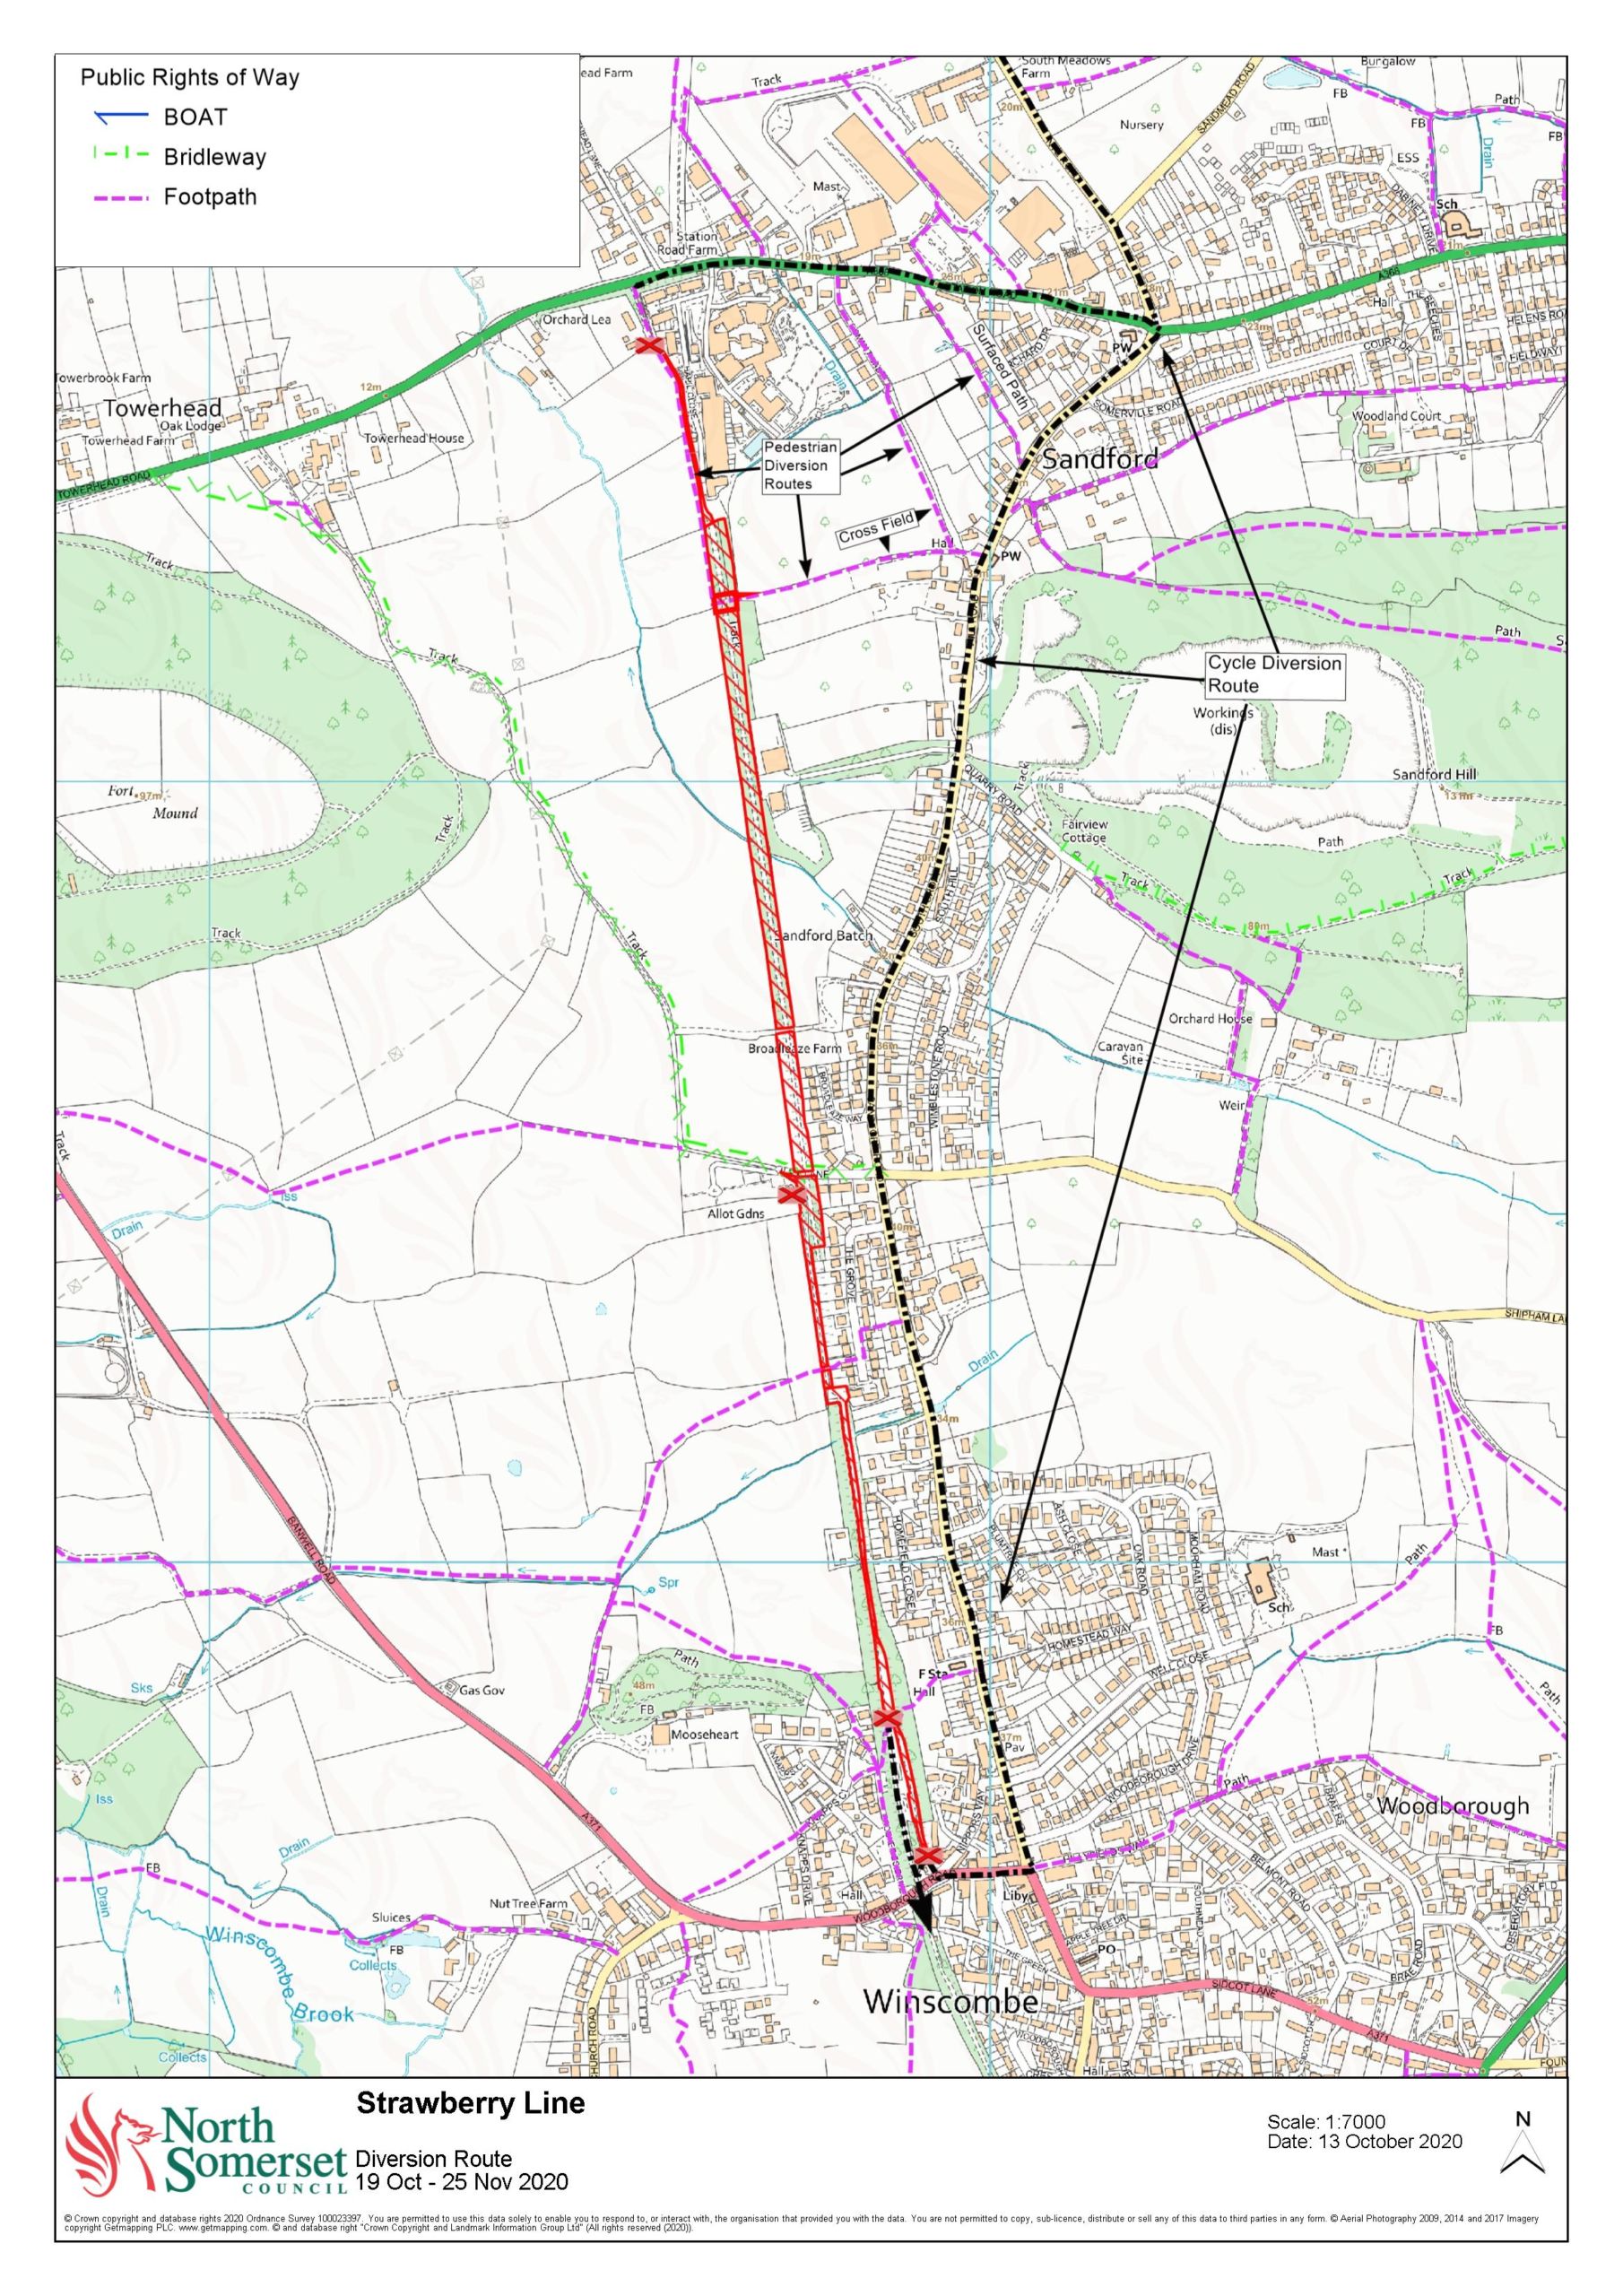 Map showing Strawberry Line walking and cycling closure for repairs works